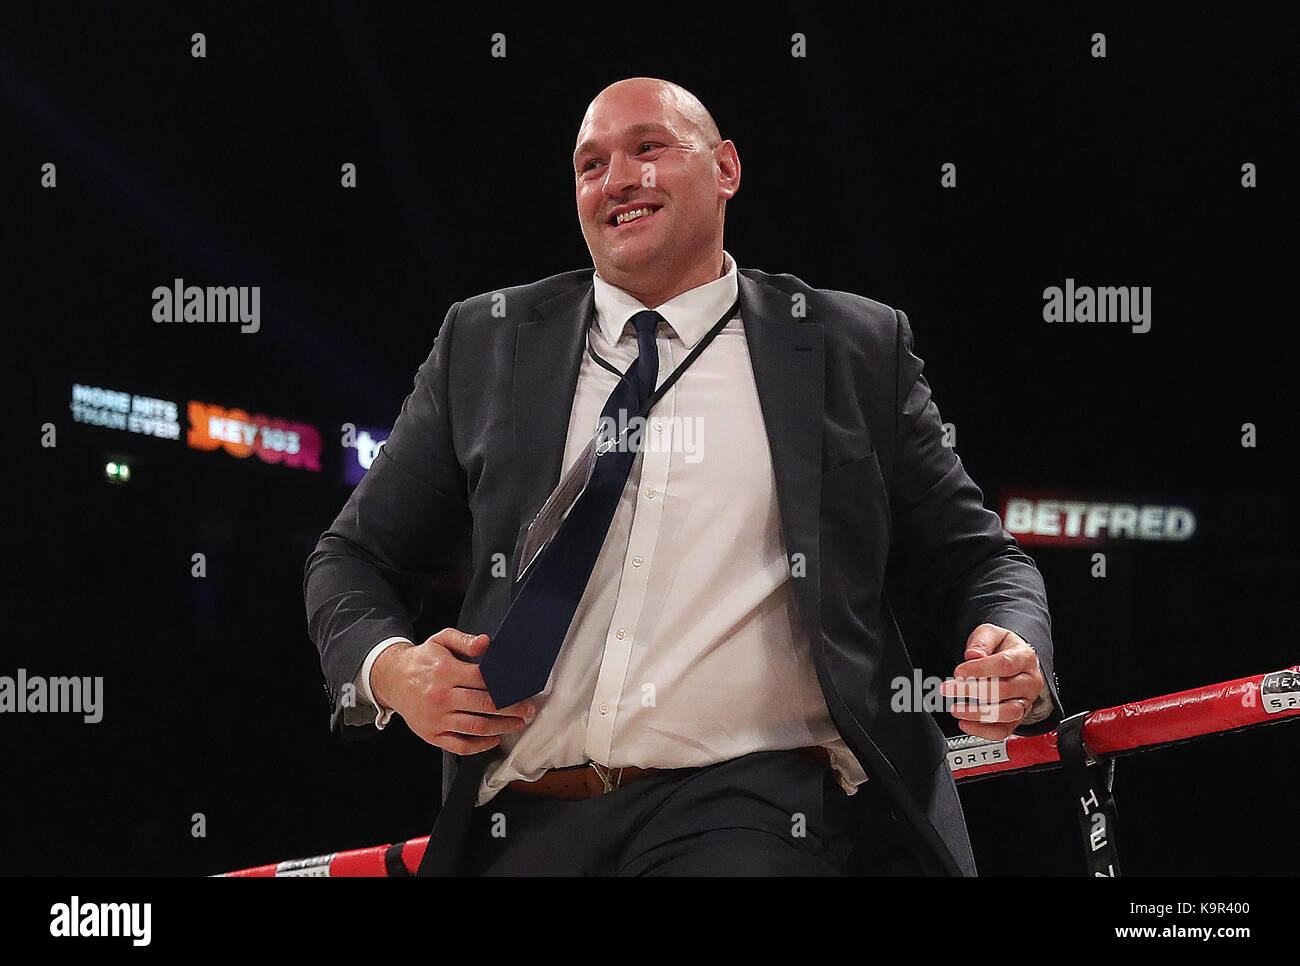 Tyson Fury at Manchester Arena. PRESS ASSOCIATION Photo. Picture date: Saturday September 23, 2017. See PA story BOXING Manchester. Photo credit should read: Nick Potts/PA Wire Stock Photo